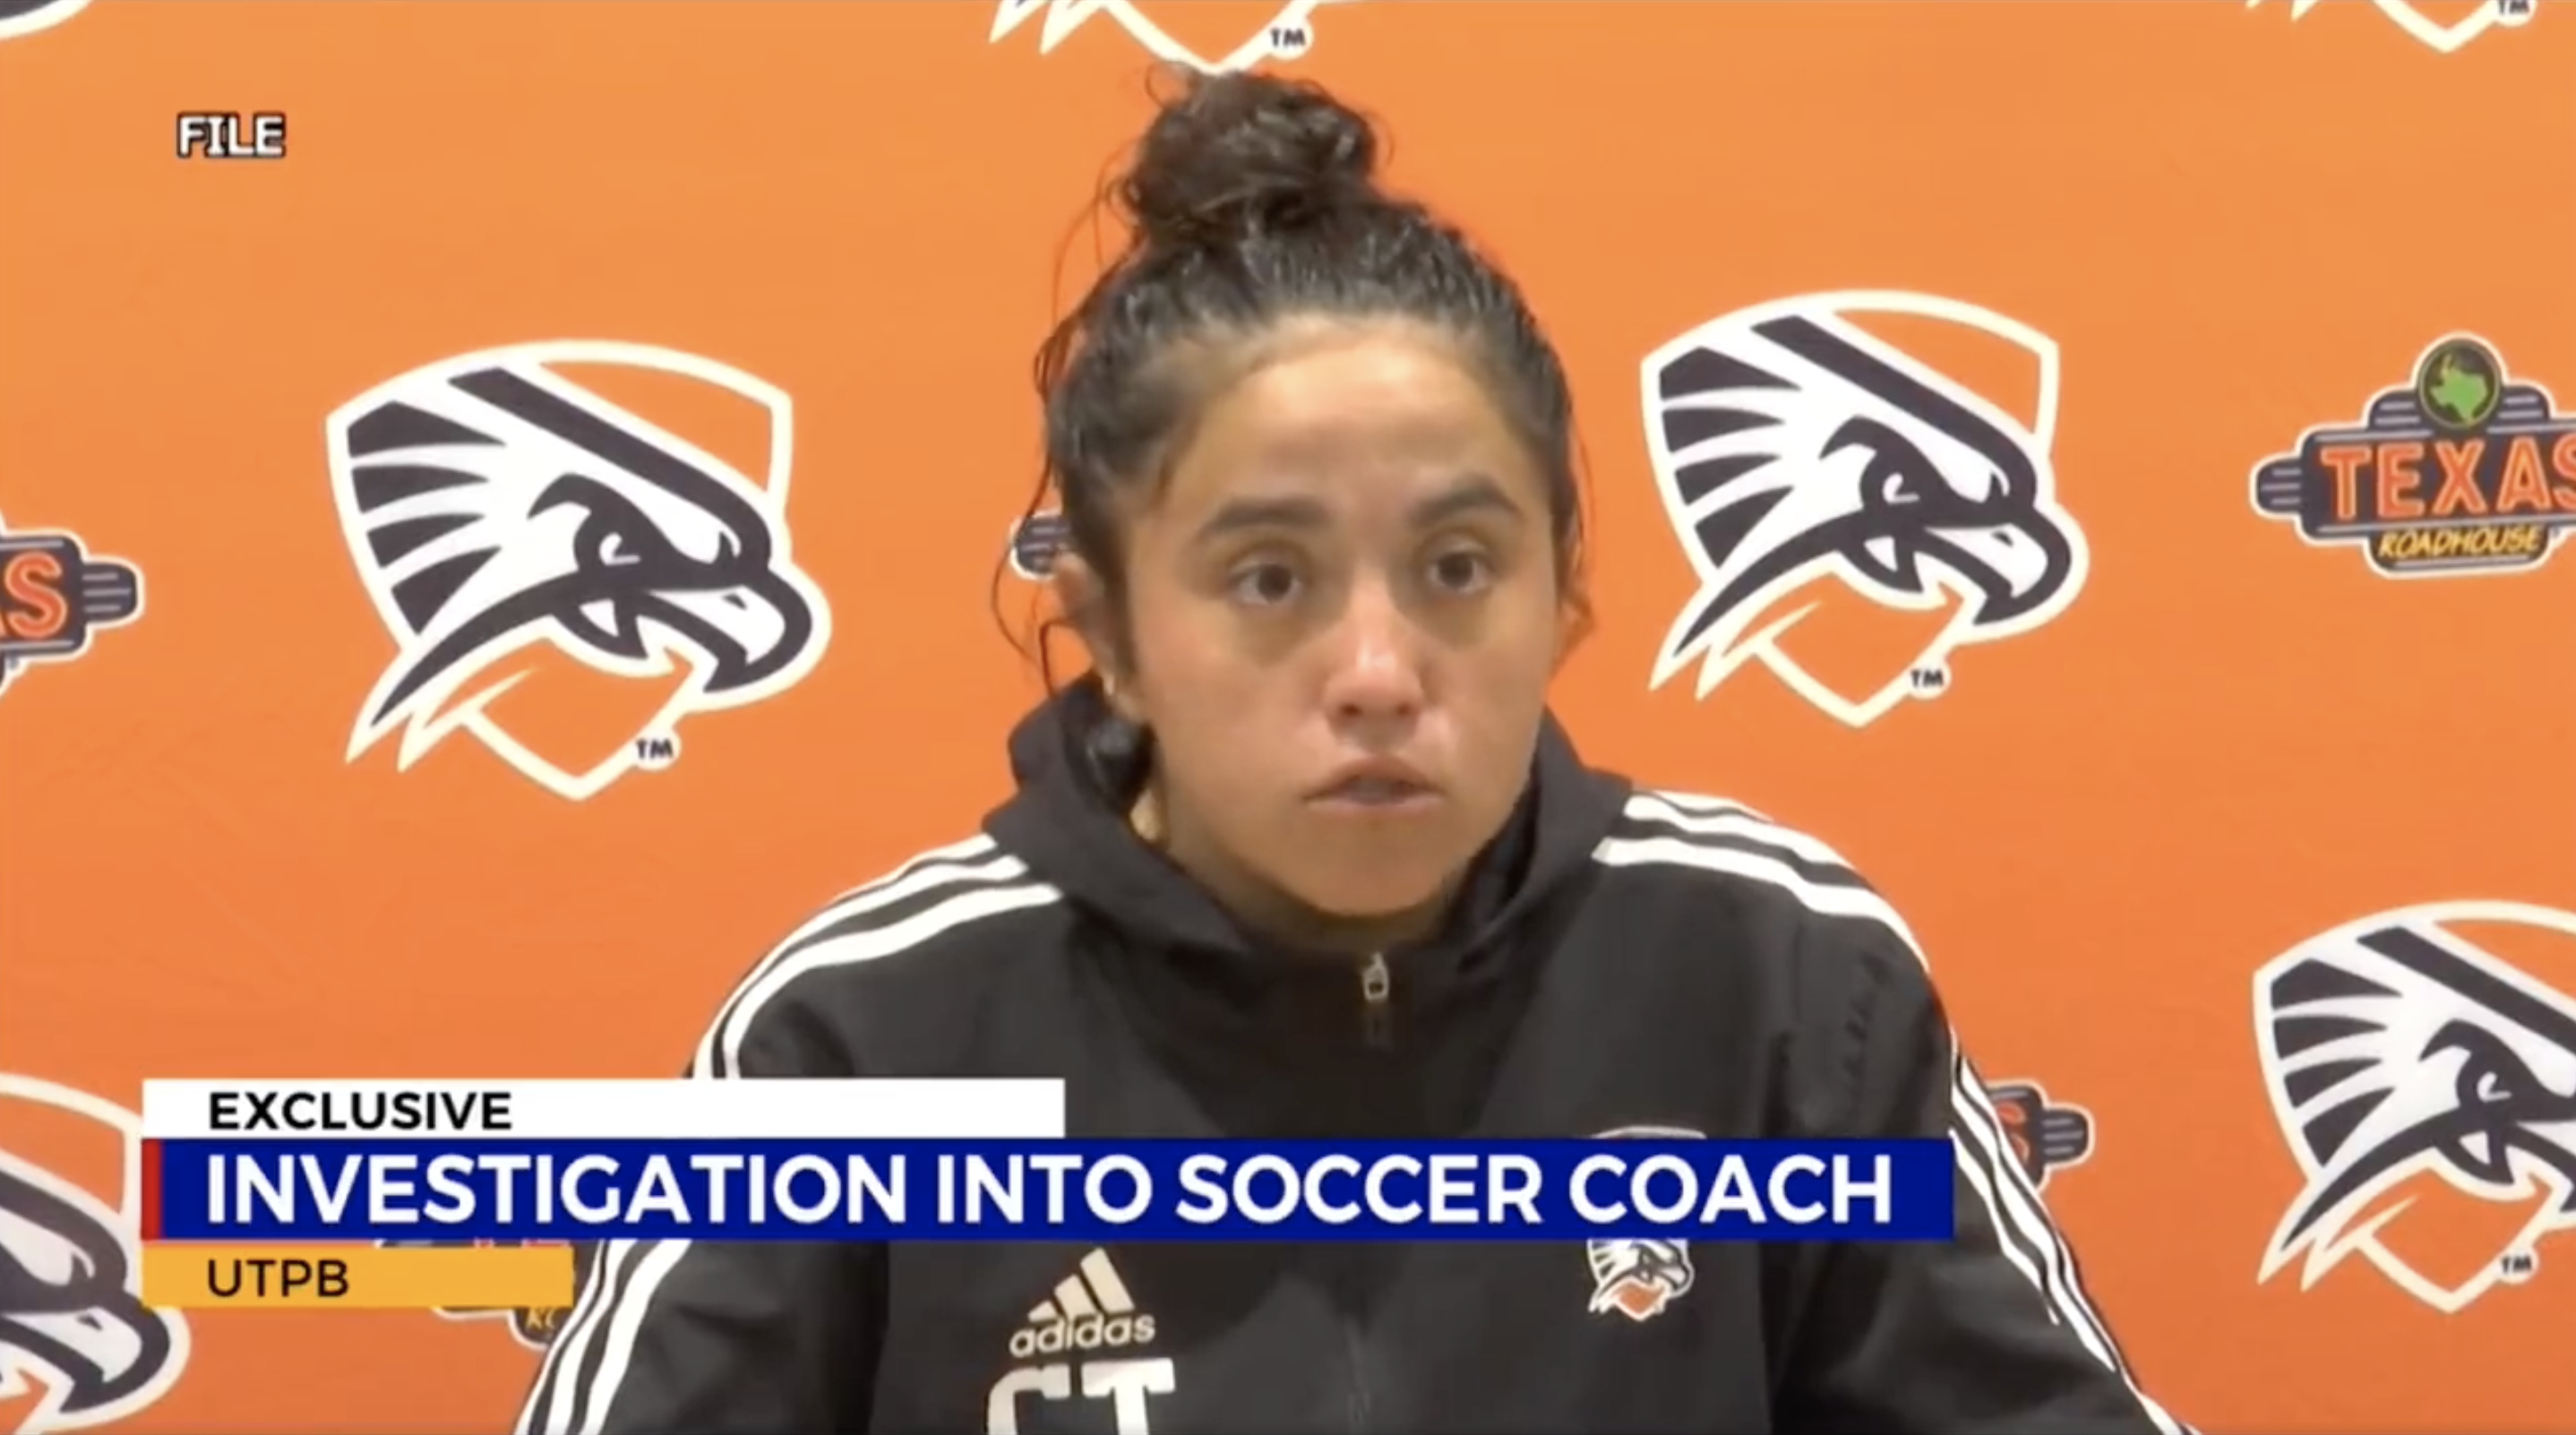 UTPB Soccer Coach On Administrative Leave After Crazy Allegations